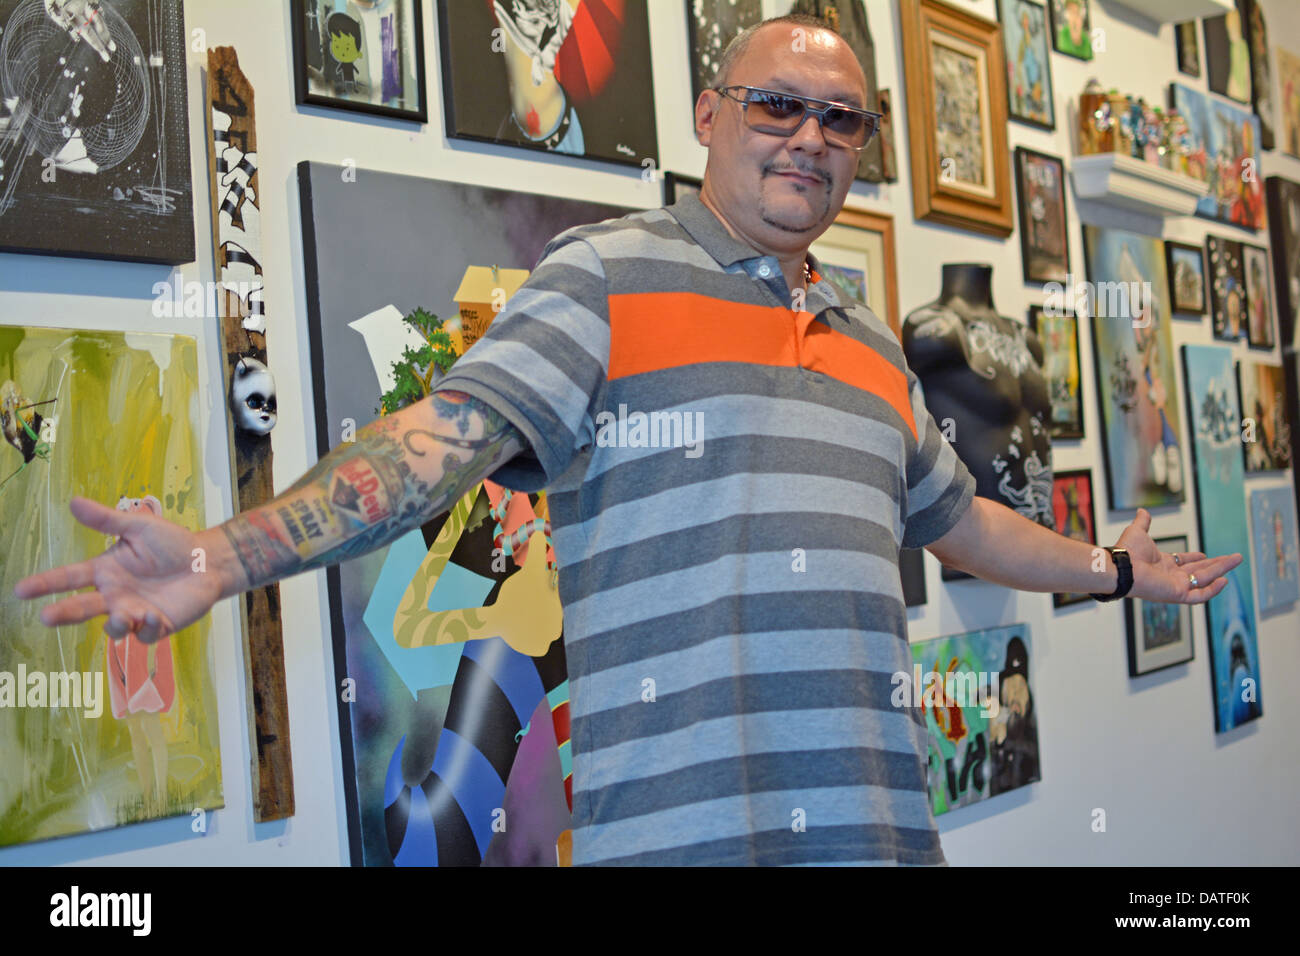 Portrait of a graffiti artist Zimad in front of his work at an exhibition at Low Brow Artique in Bushwick, Brooklyn, New York Stock Photo